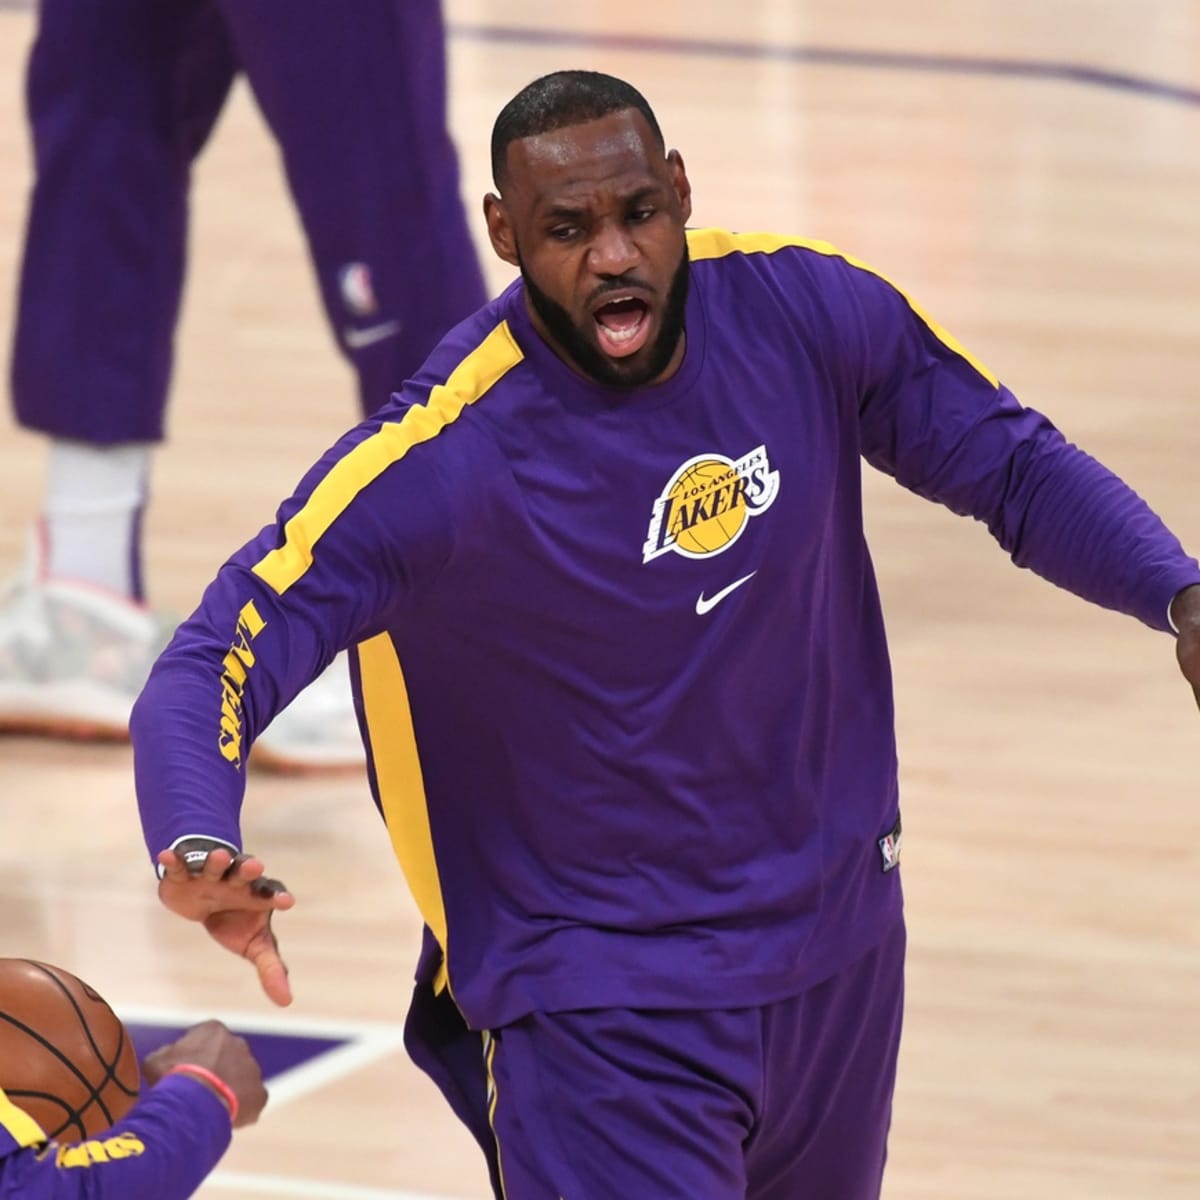 NBA Fans Speculate Lakers' LeBron James Sub-Tweeted Sixers' Ben